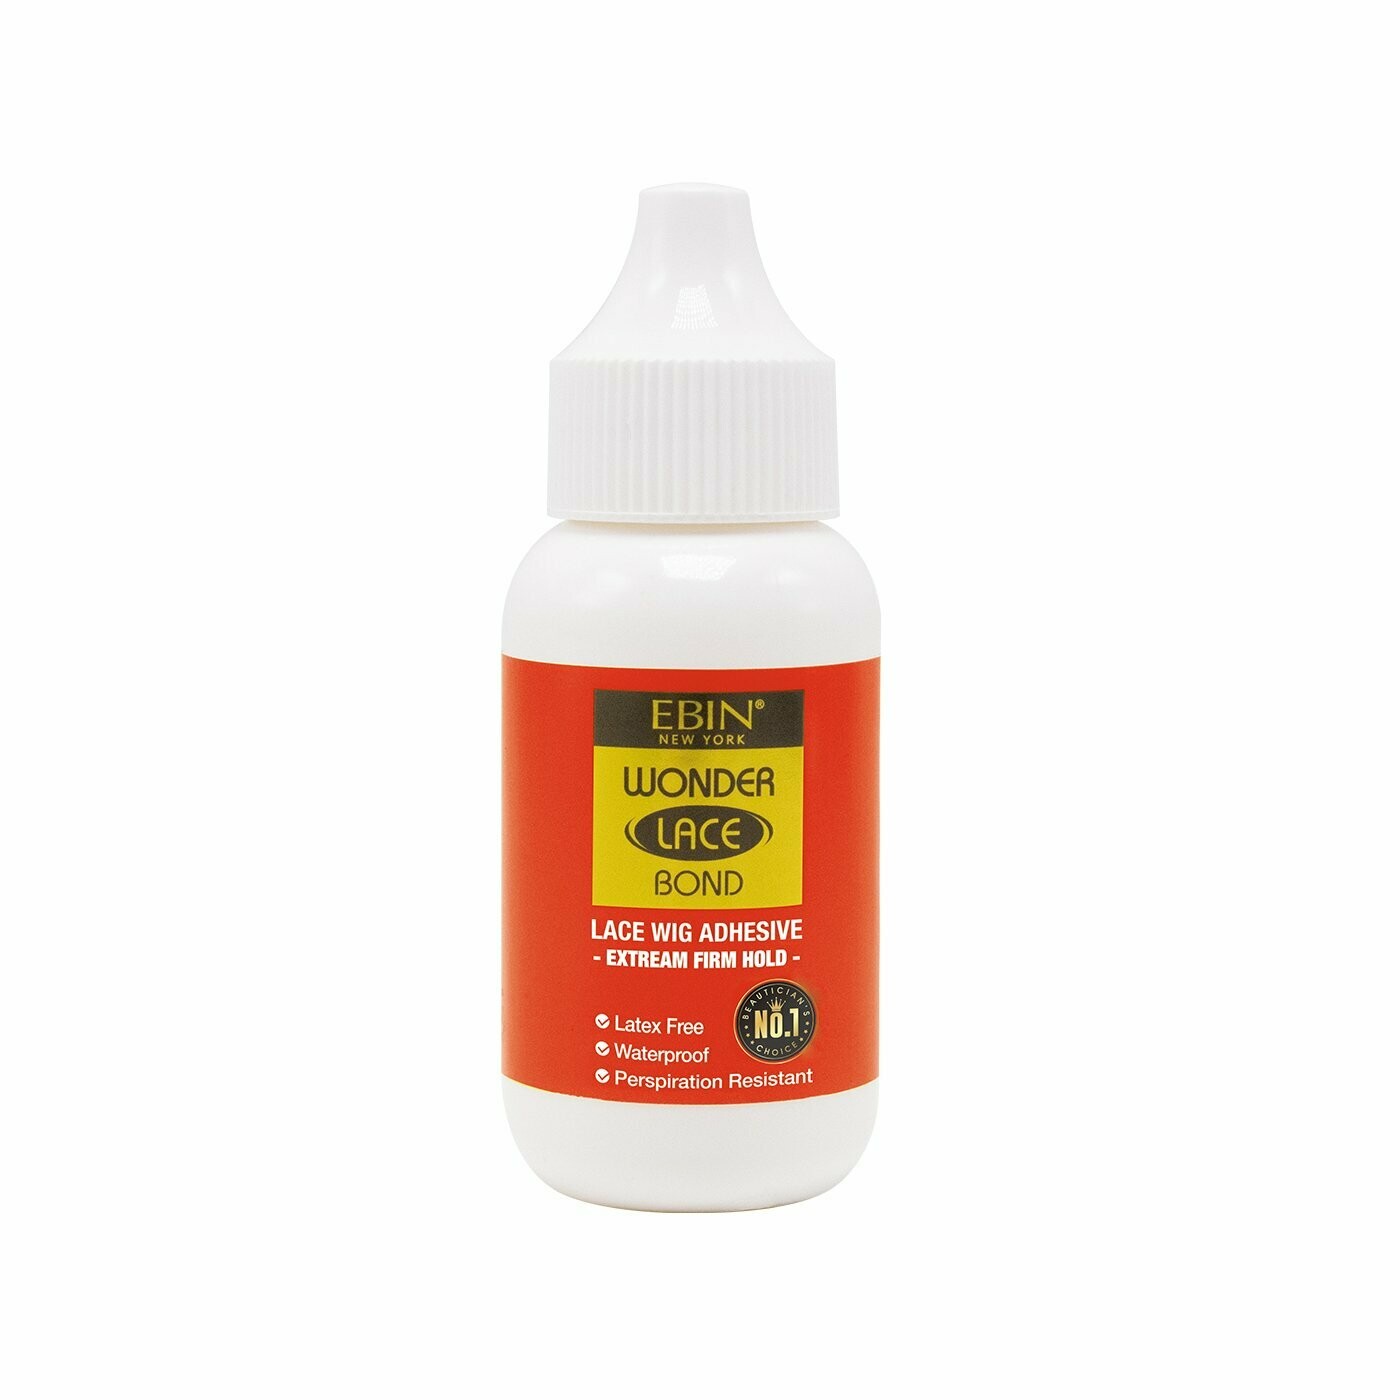 EBIN Wonder Lace Bond Waterproof Adhesive - Extreme Firm Hold